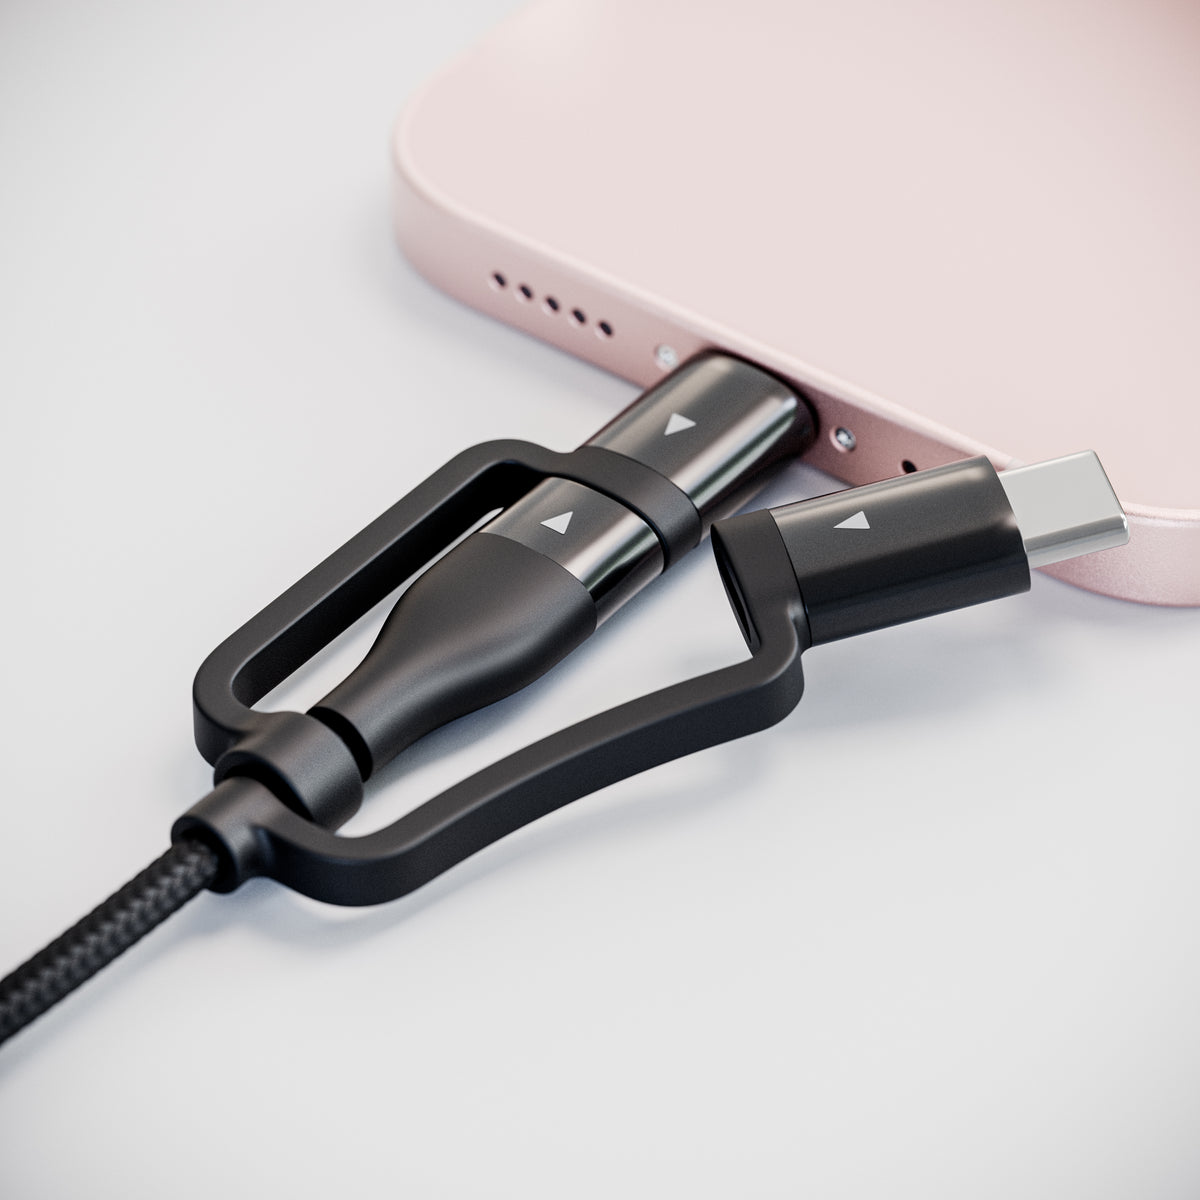 A large marketing image providing additional information about the product ALOGIC Elements 3-in-1 Charge and Sync Combo Cable - 1m - Additional alt info not provided